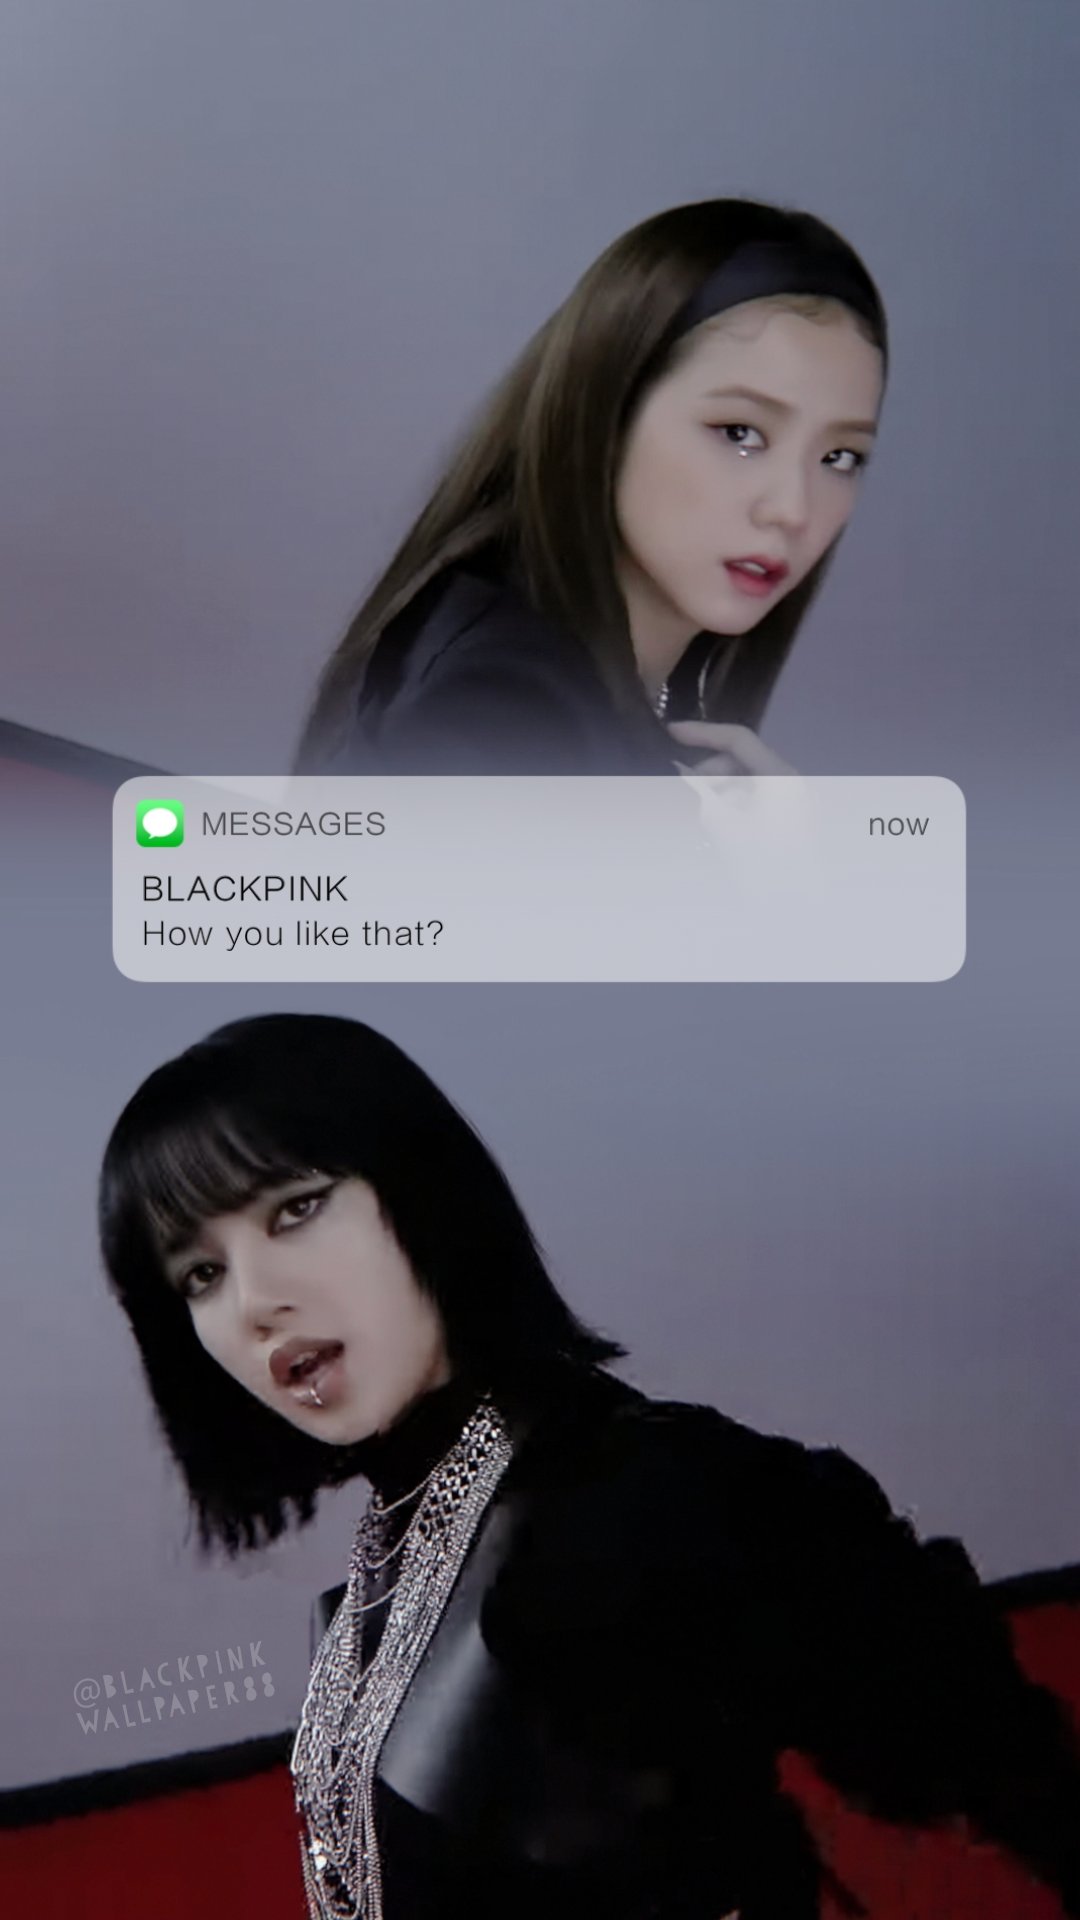 Blackpink Wallpapers How You Like That Video Teaser Wallpapers Howyoulikethatlisa Welikethatjisoo Howyoulikethat D7 Blackpink Blackpinkwallpaper T Co Cbocajudpg